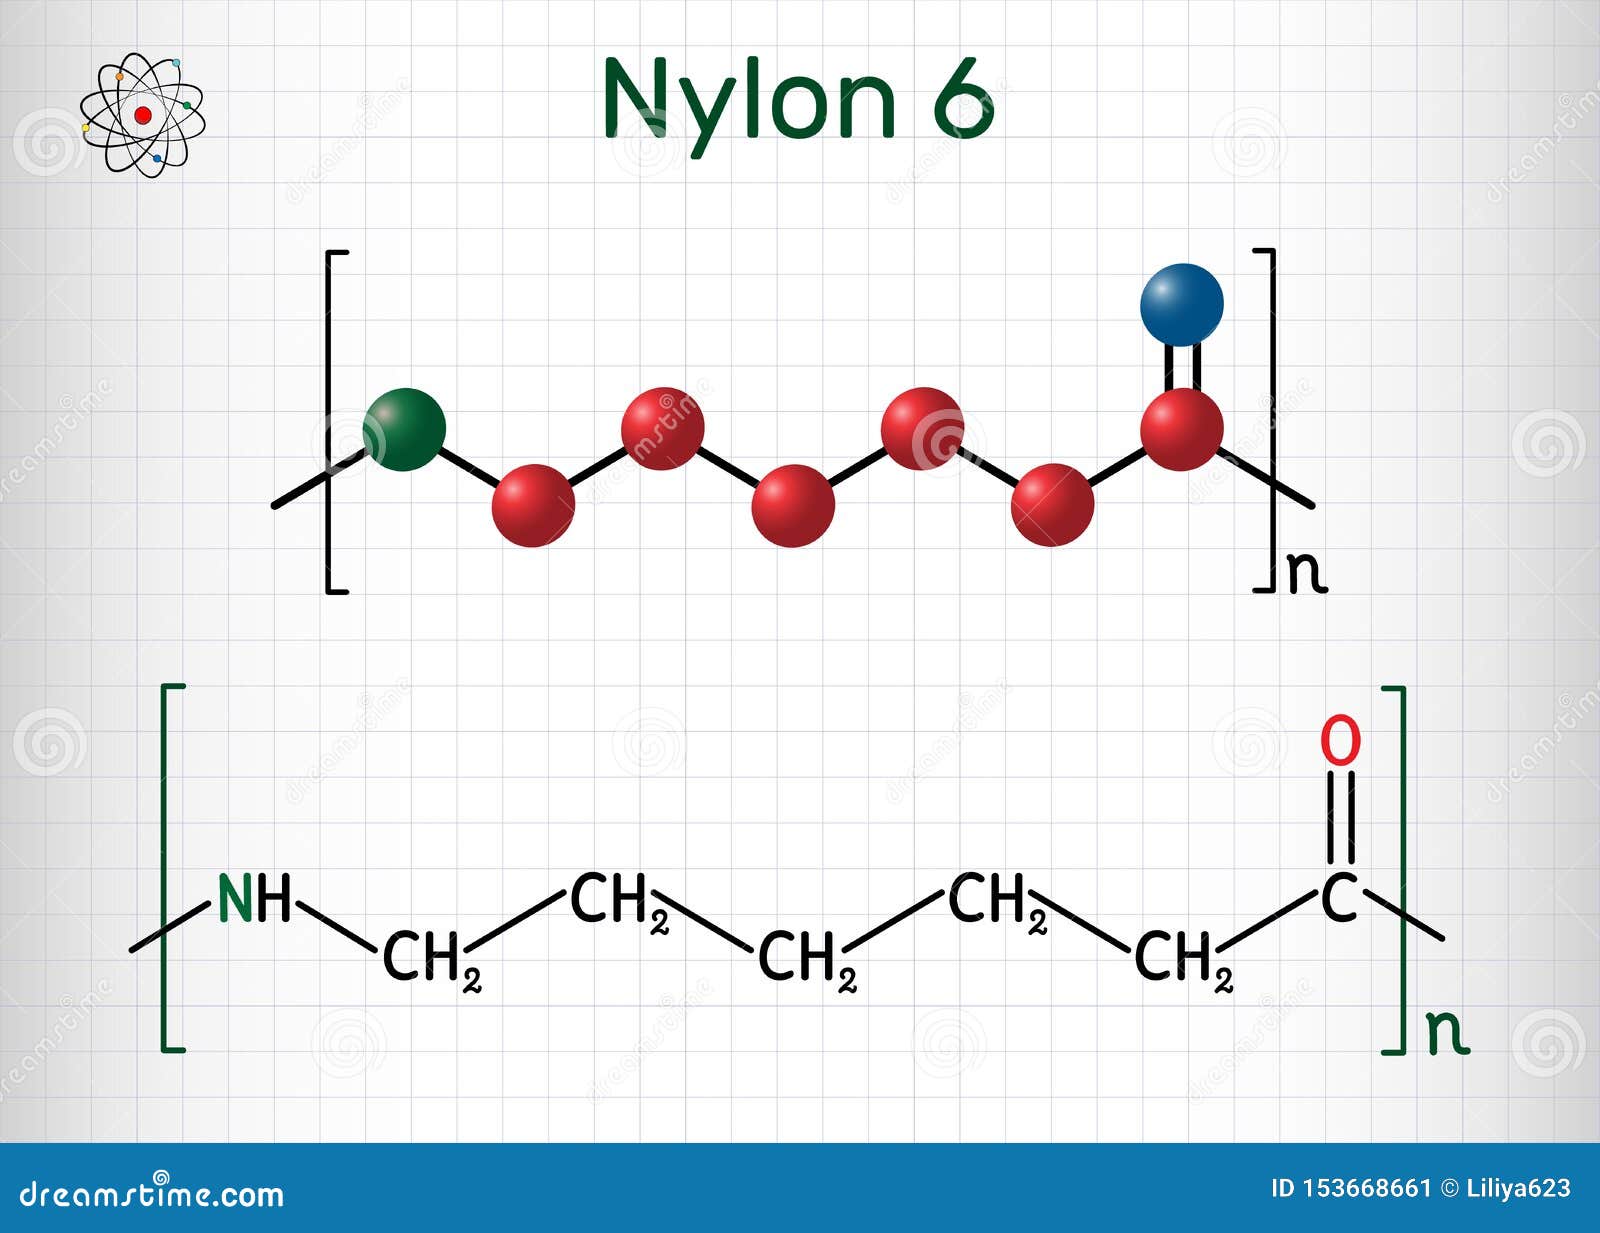 Nylon 6 or Polycaprolactam Polymer Molecule. Structural Chemical